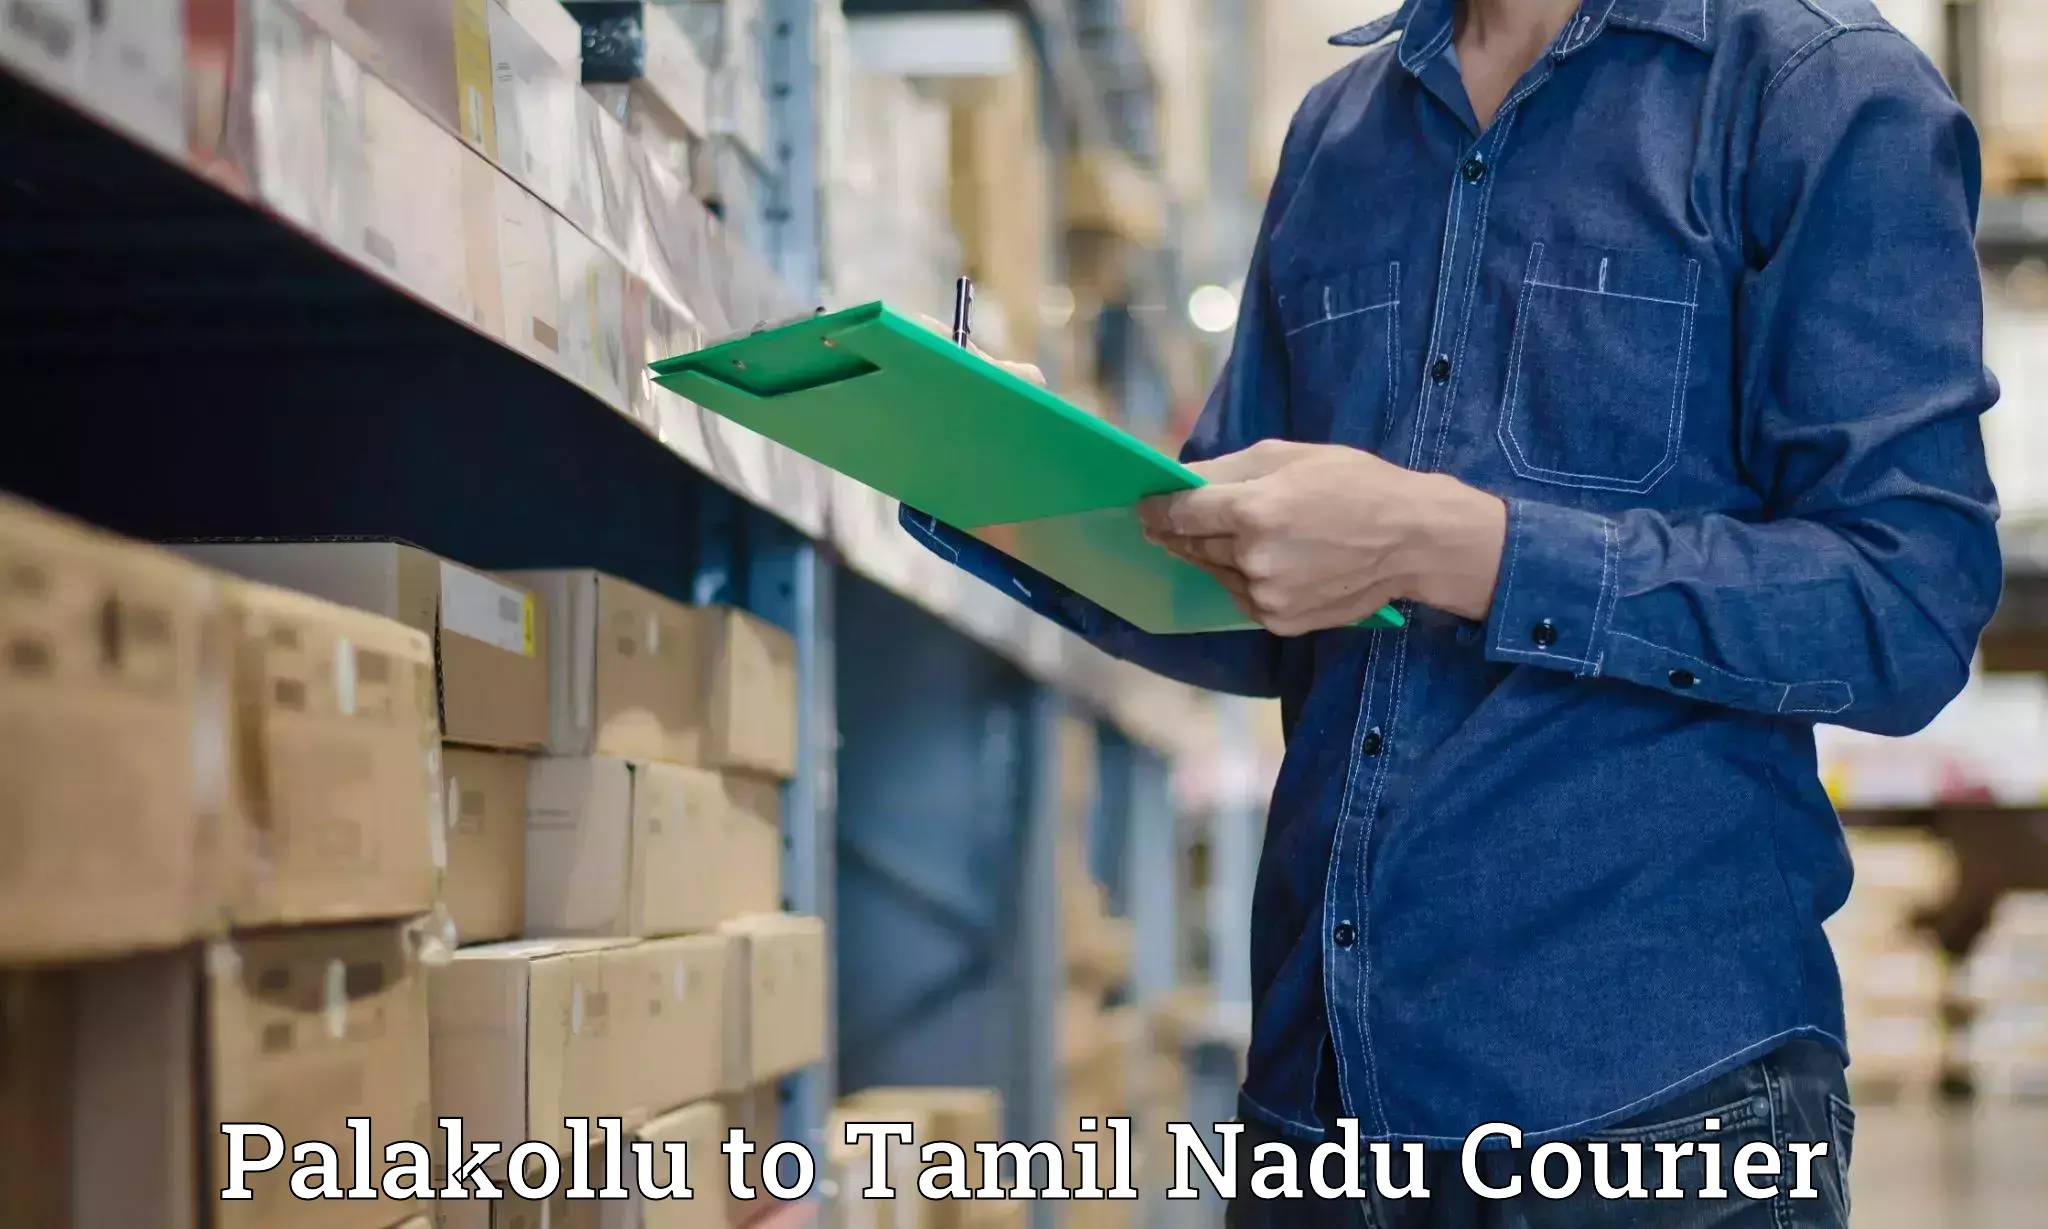 Reliable courier services Palakollu to Tuticorin Port